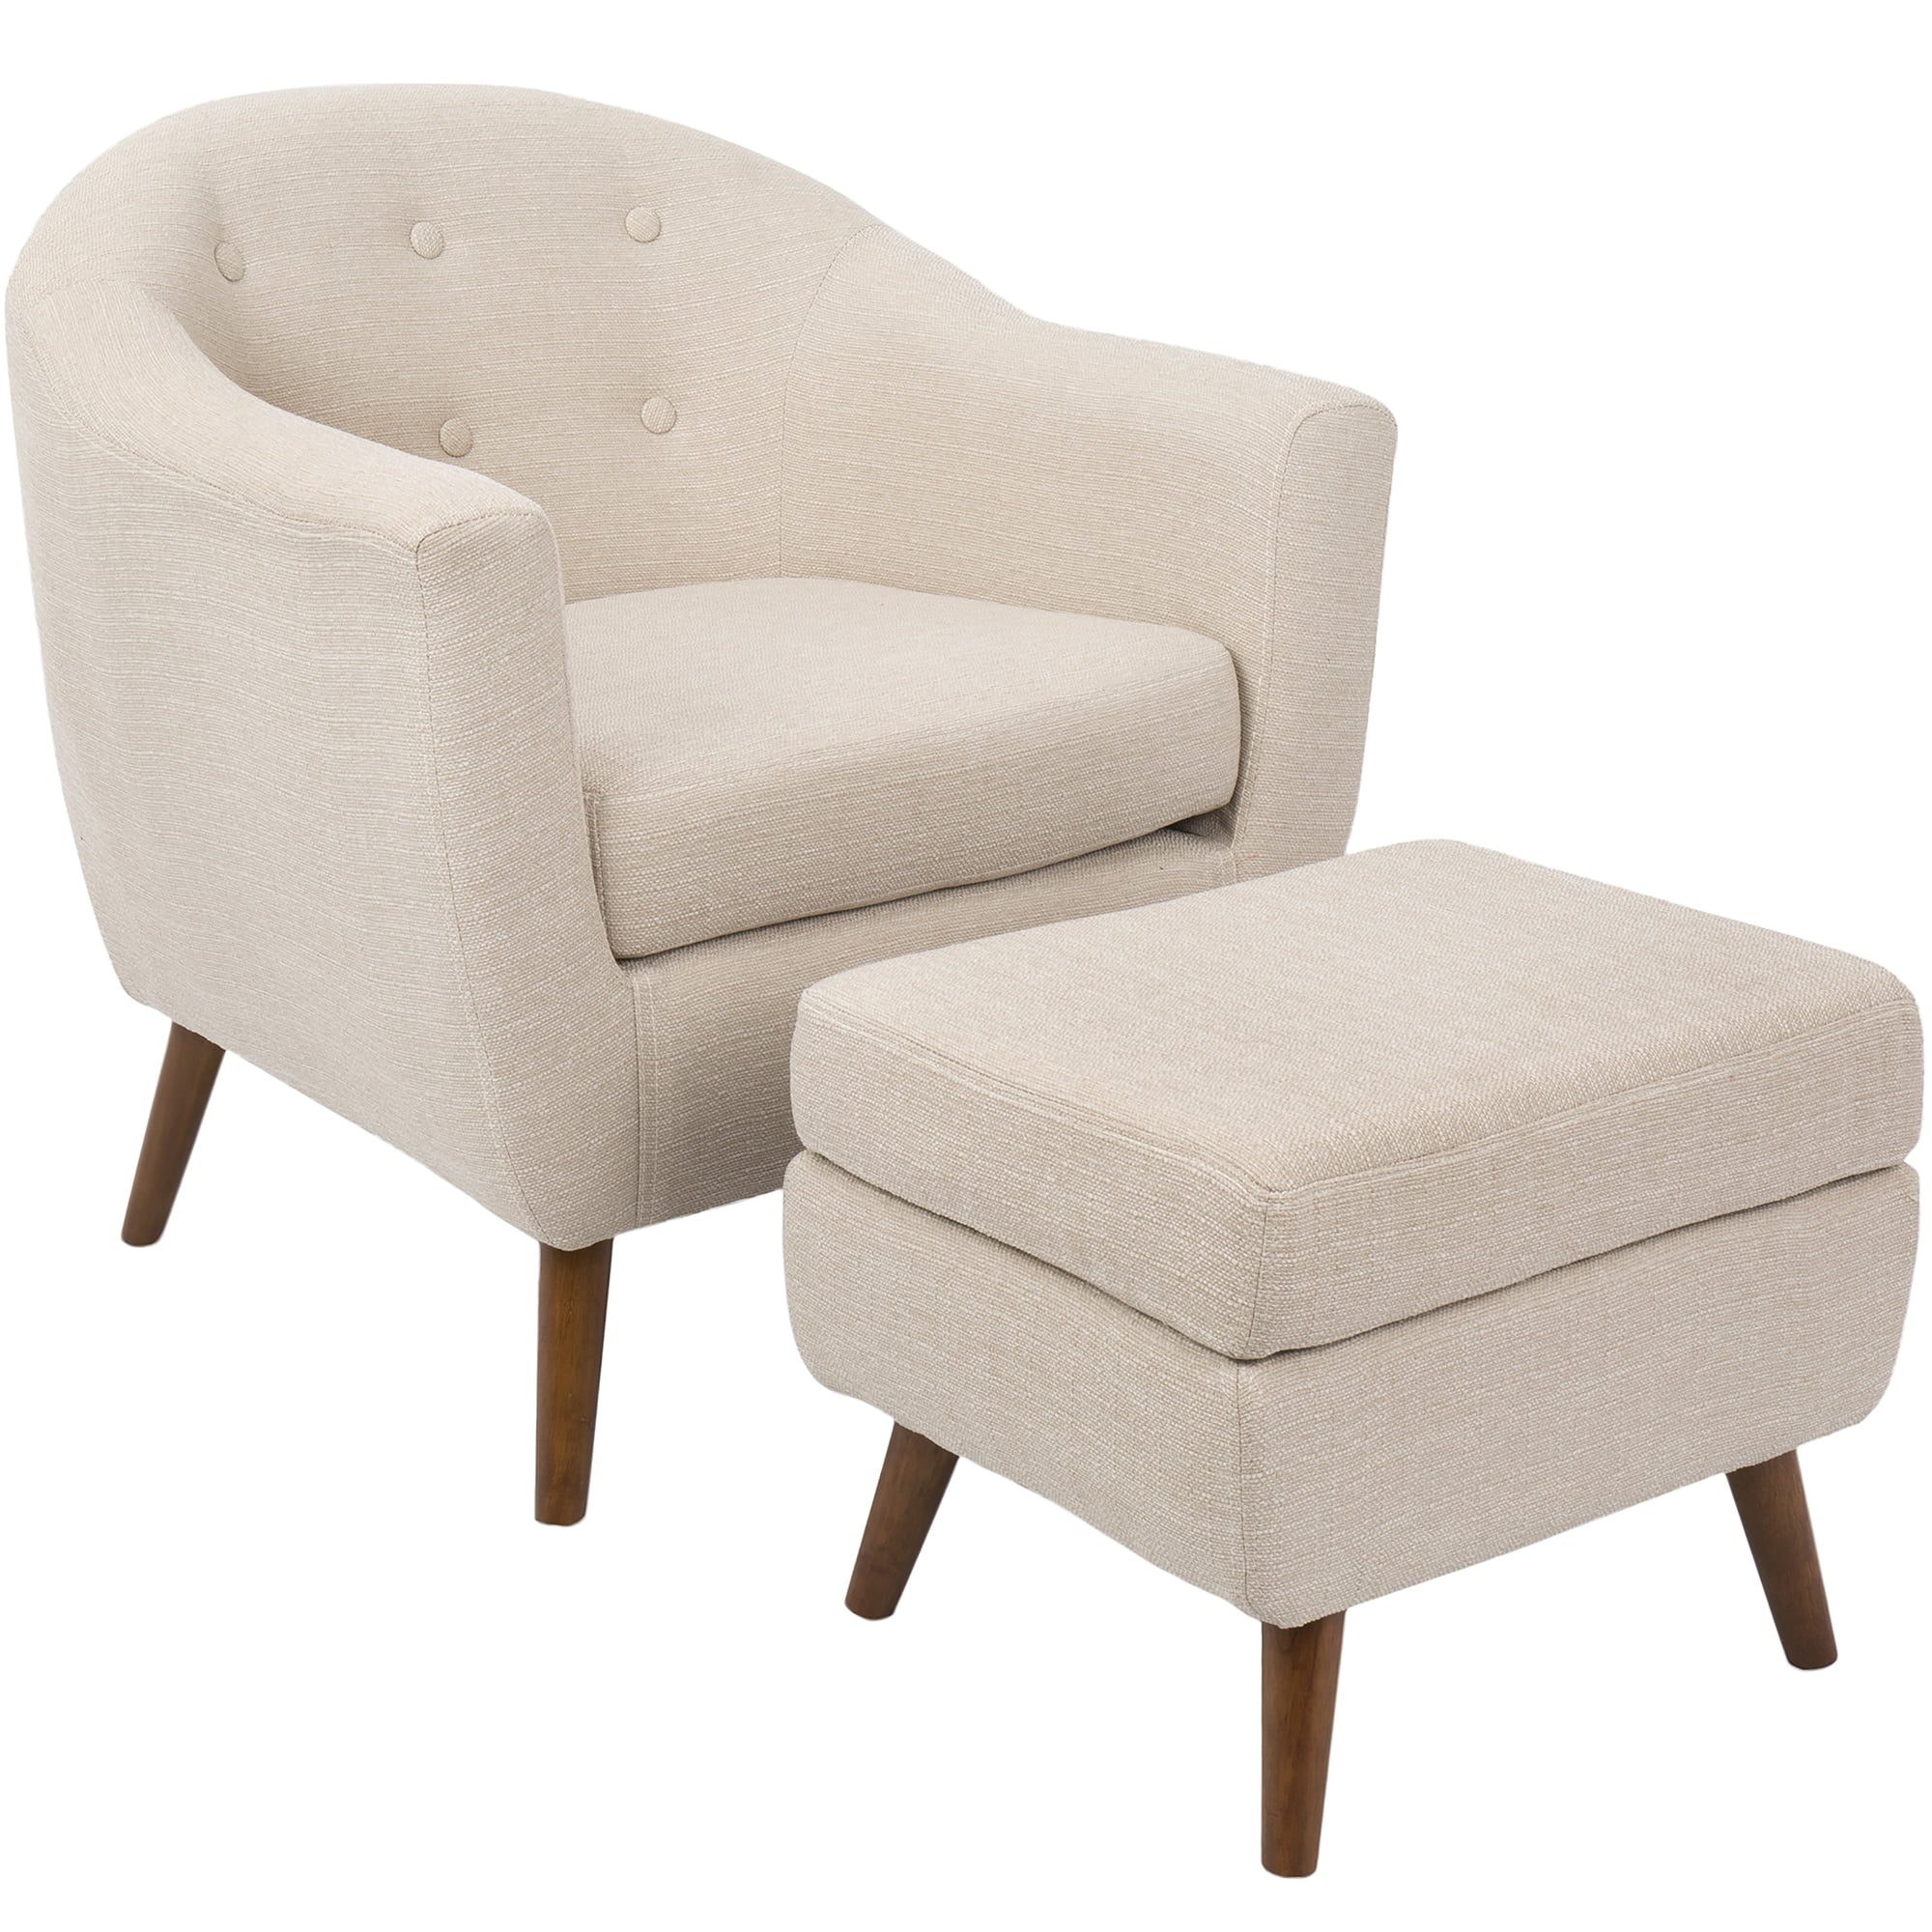 Rockwell Mid-Century Modern Accent Chair and Ottoman in Beige by